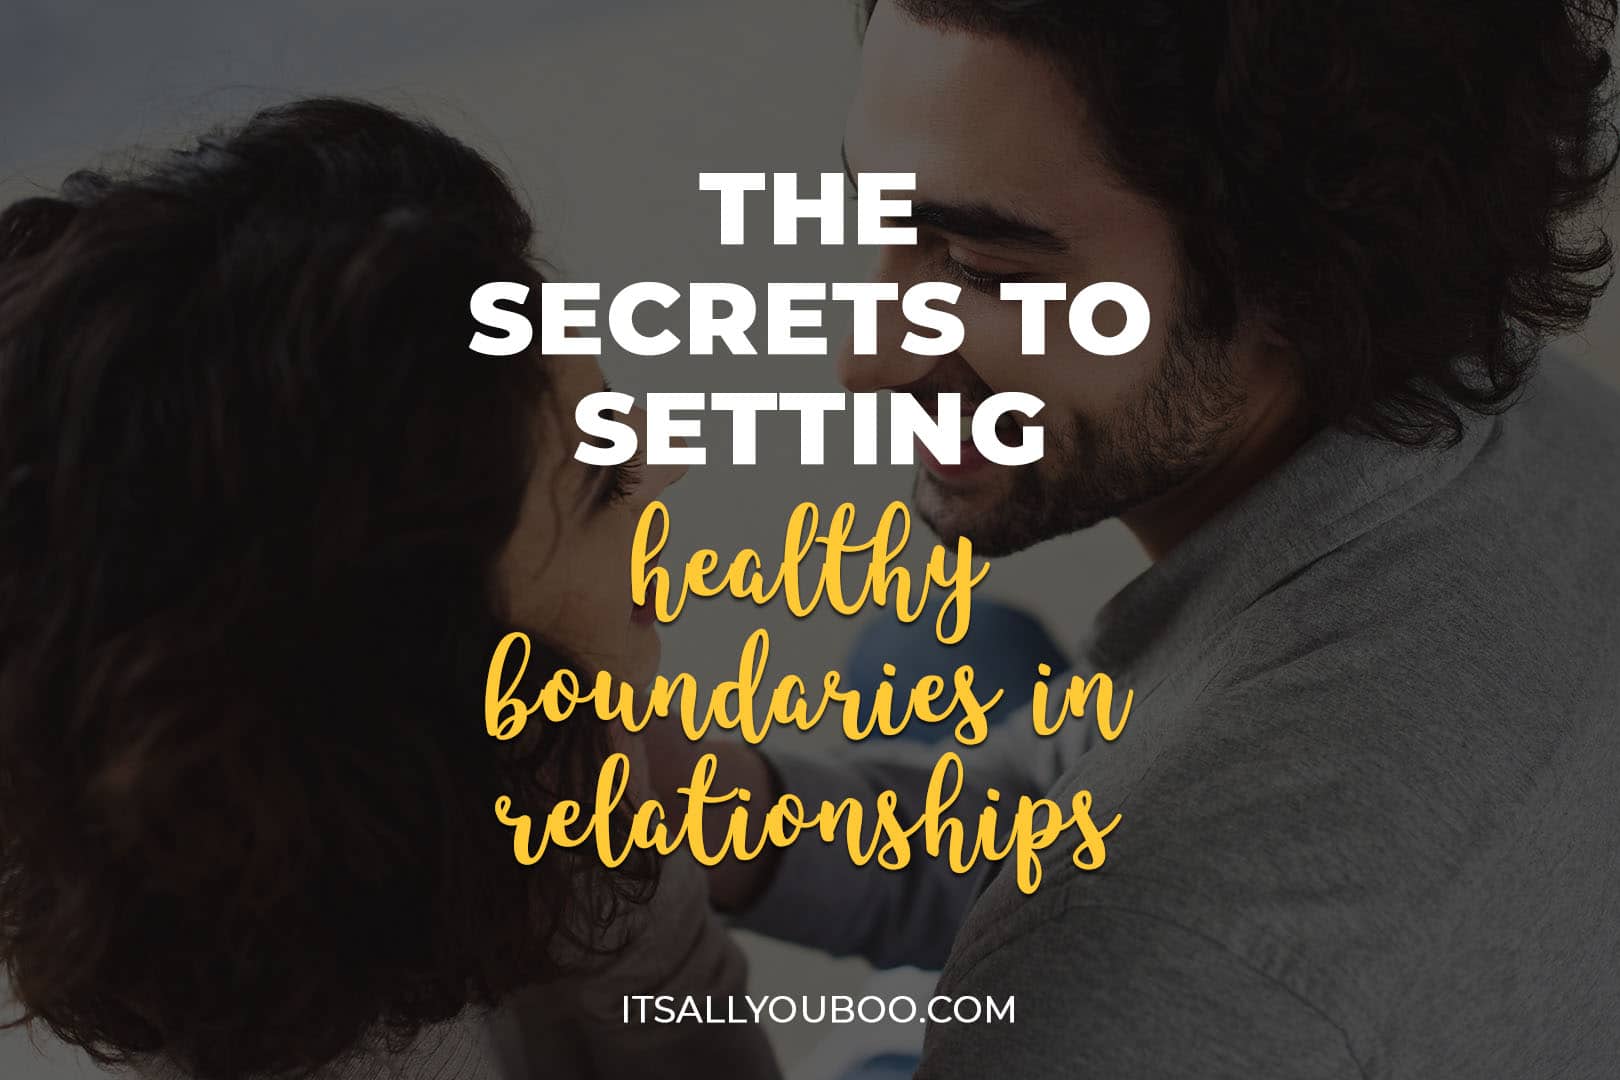 The Secret to Setting Healthy Boundaries in Relationships